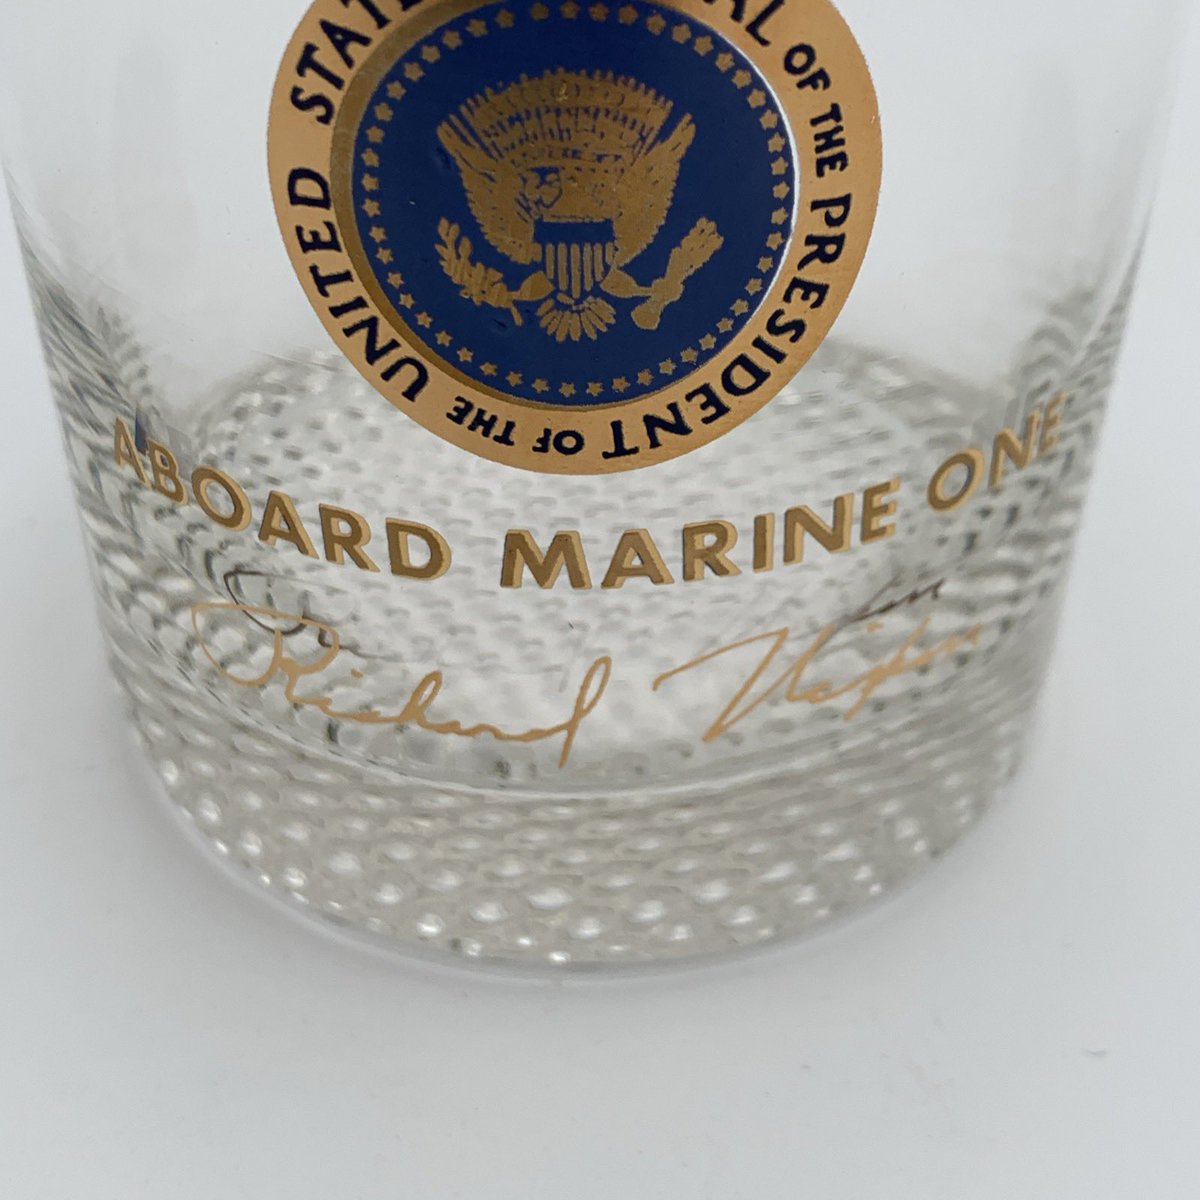 Here is a rare one. Marine One whiskey glass from the Richard Nixon presidency. Still has the tag. So excited to find this! #president #nixon #marineone #vintagebar #vintageofmidwest